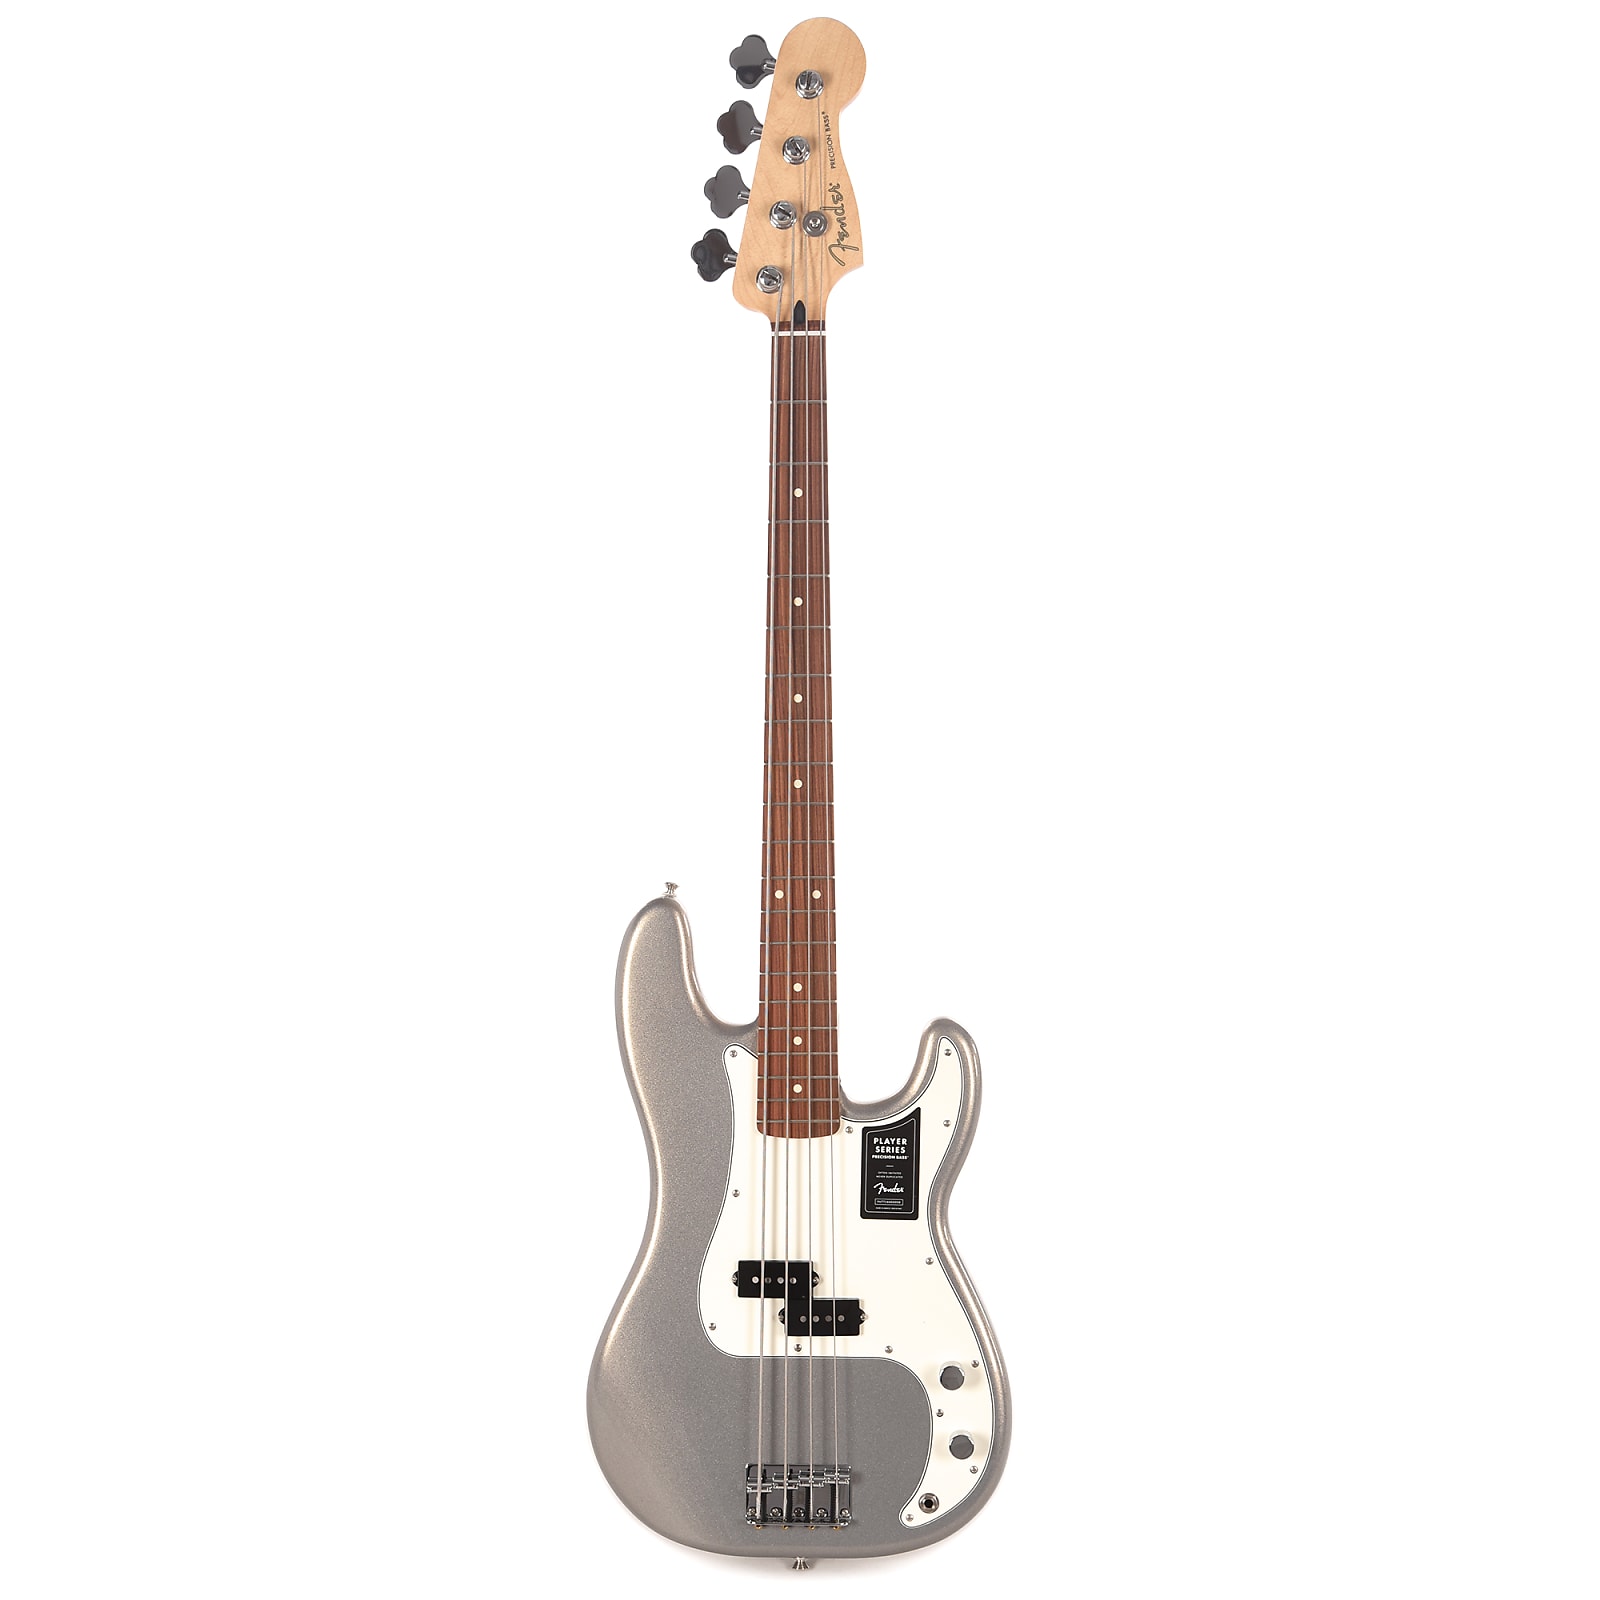 Fender Precision Bass Player Mex Pf - Silver - Solid body electric bass - Variation 2